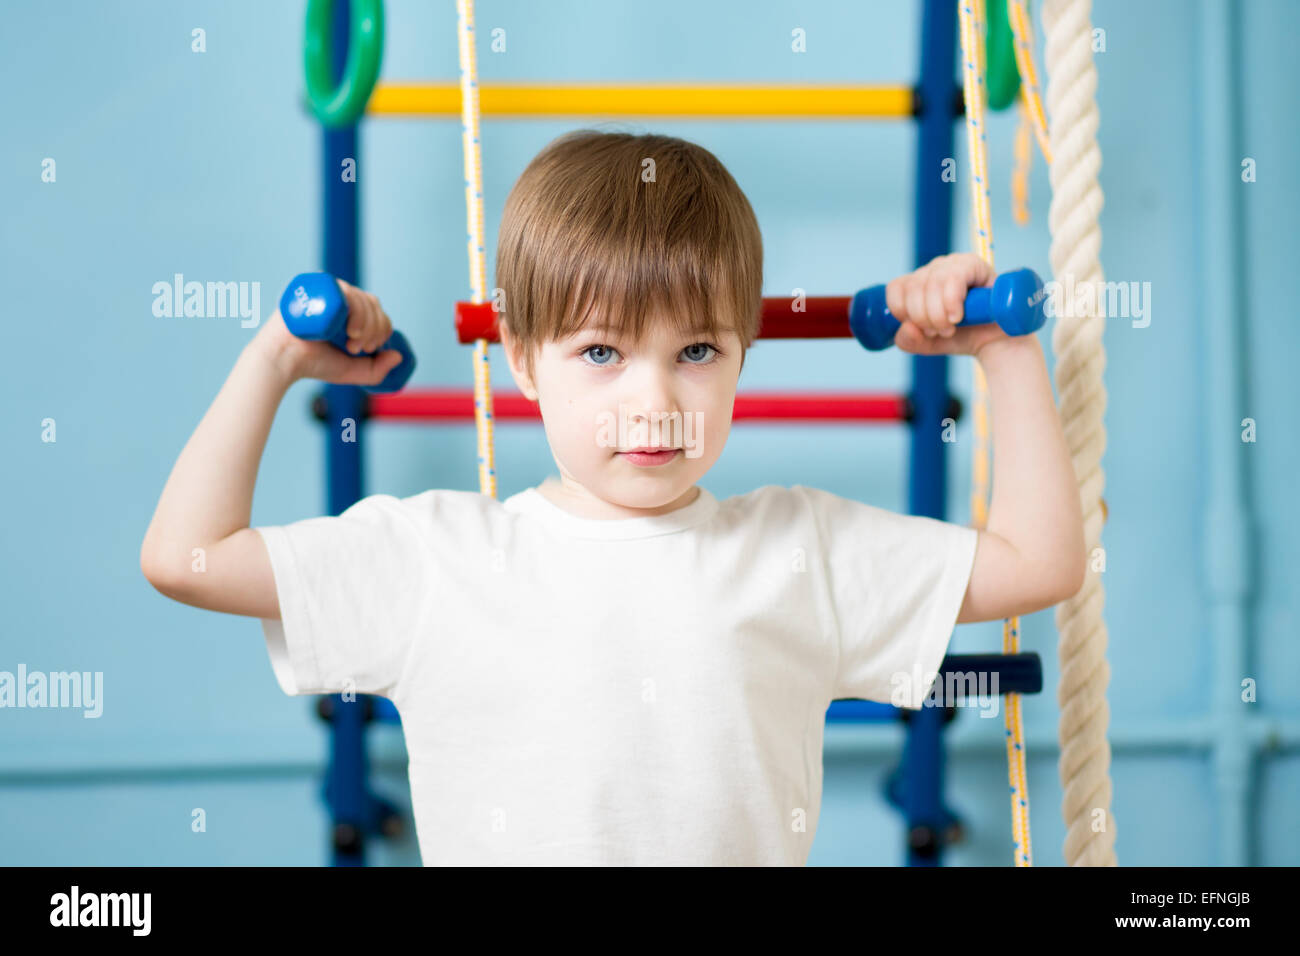 Strong kid boy exercising with dumbbells Banque D'Images